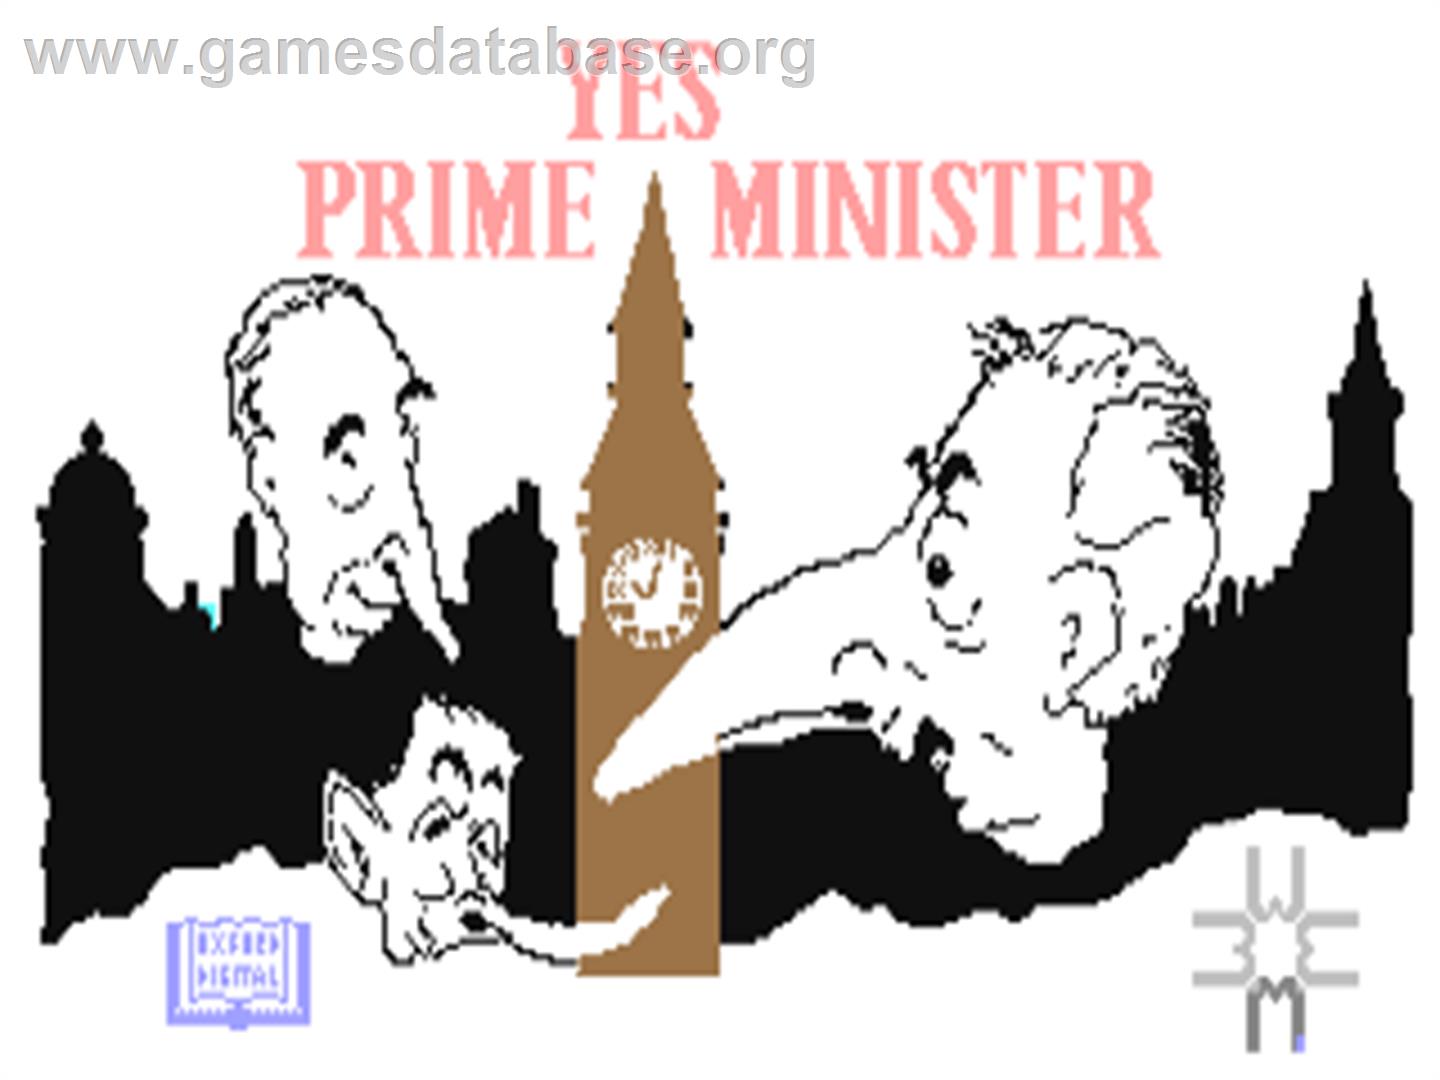 Yes, Prime Minister - Commodore 64 - Artwork - Title Screen